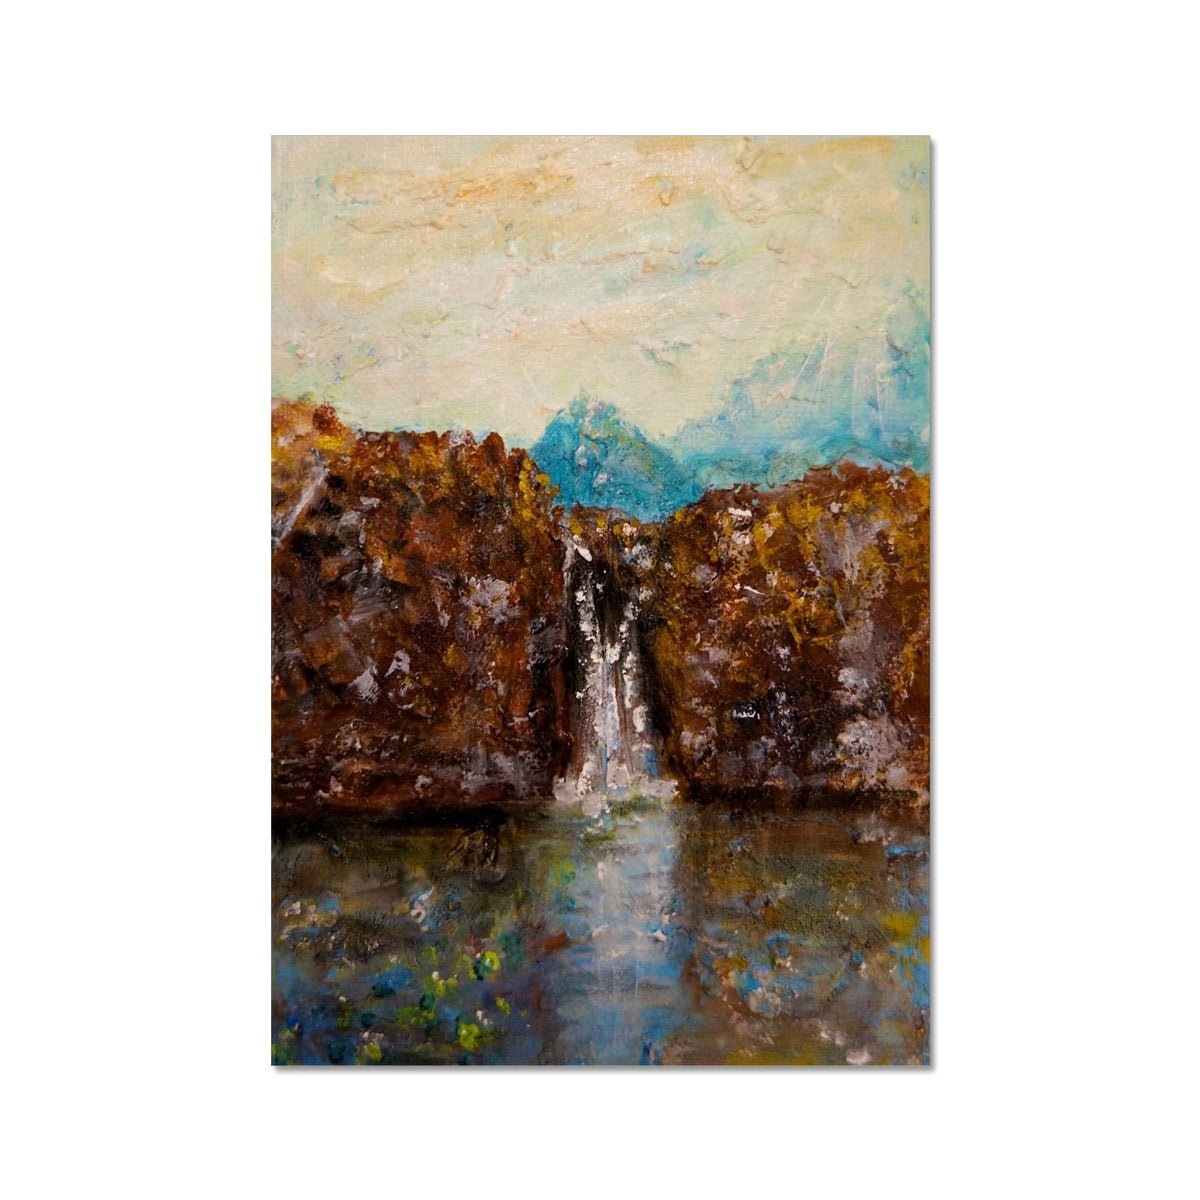 Skye Fairy Pools Painting | Fine Art Prints From Scotland-Unframed Prints-Skye Art Gallery-A4 Portrait-Paintings, Prints, Homeware, Art Gifts From Scotland By Scottish Artist Kevin Hunter